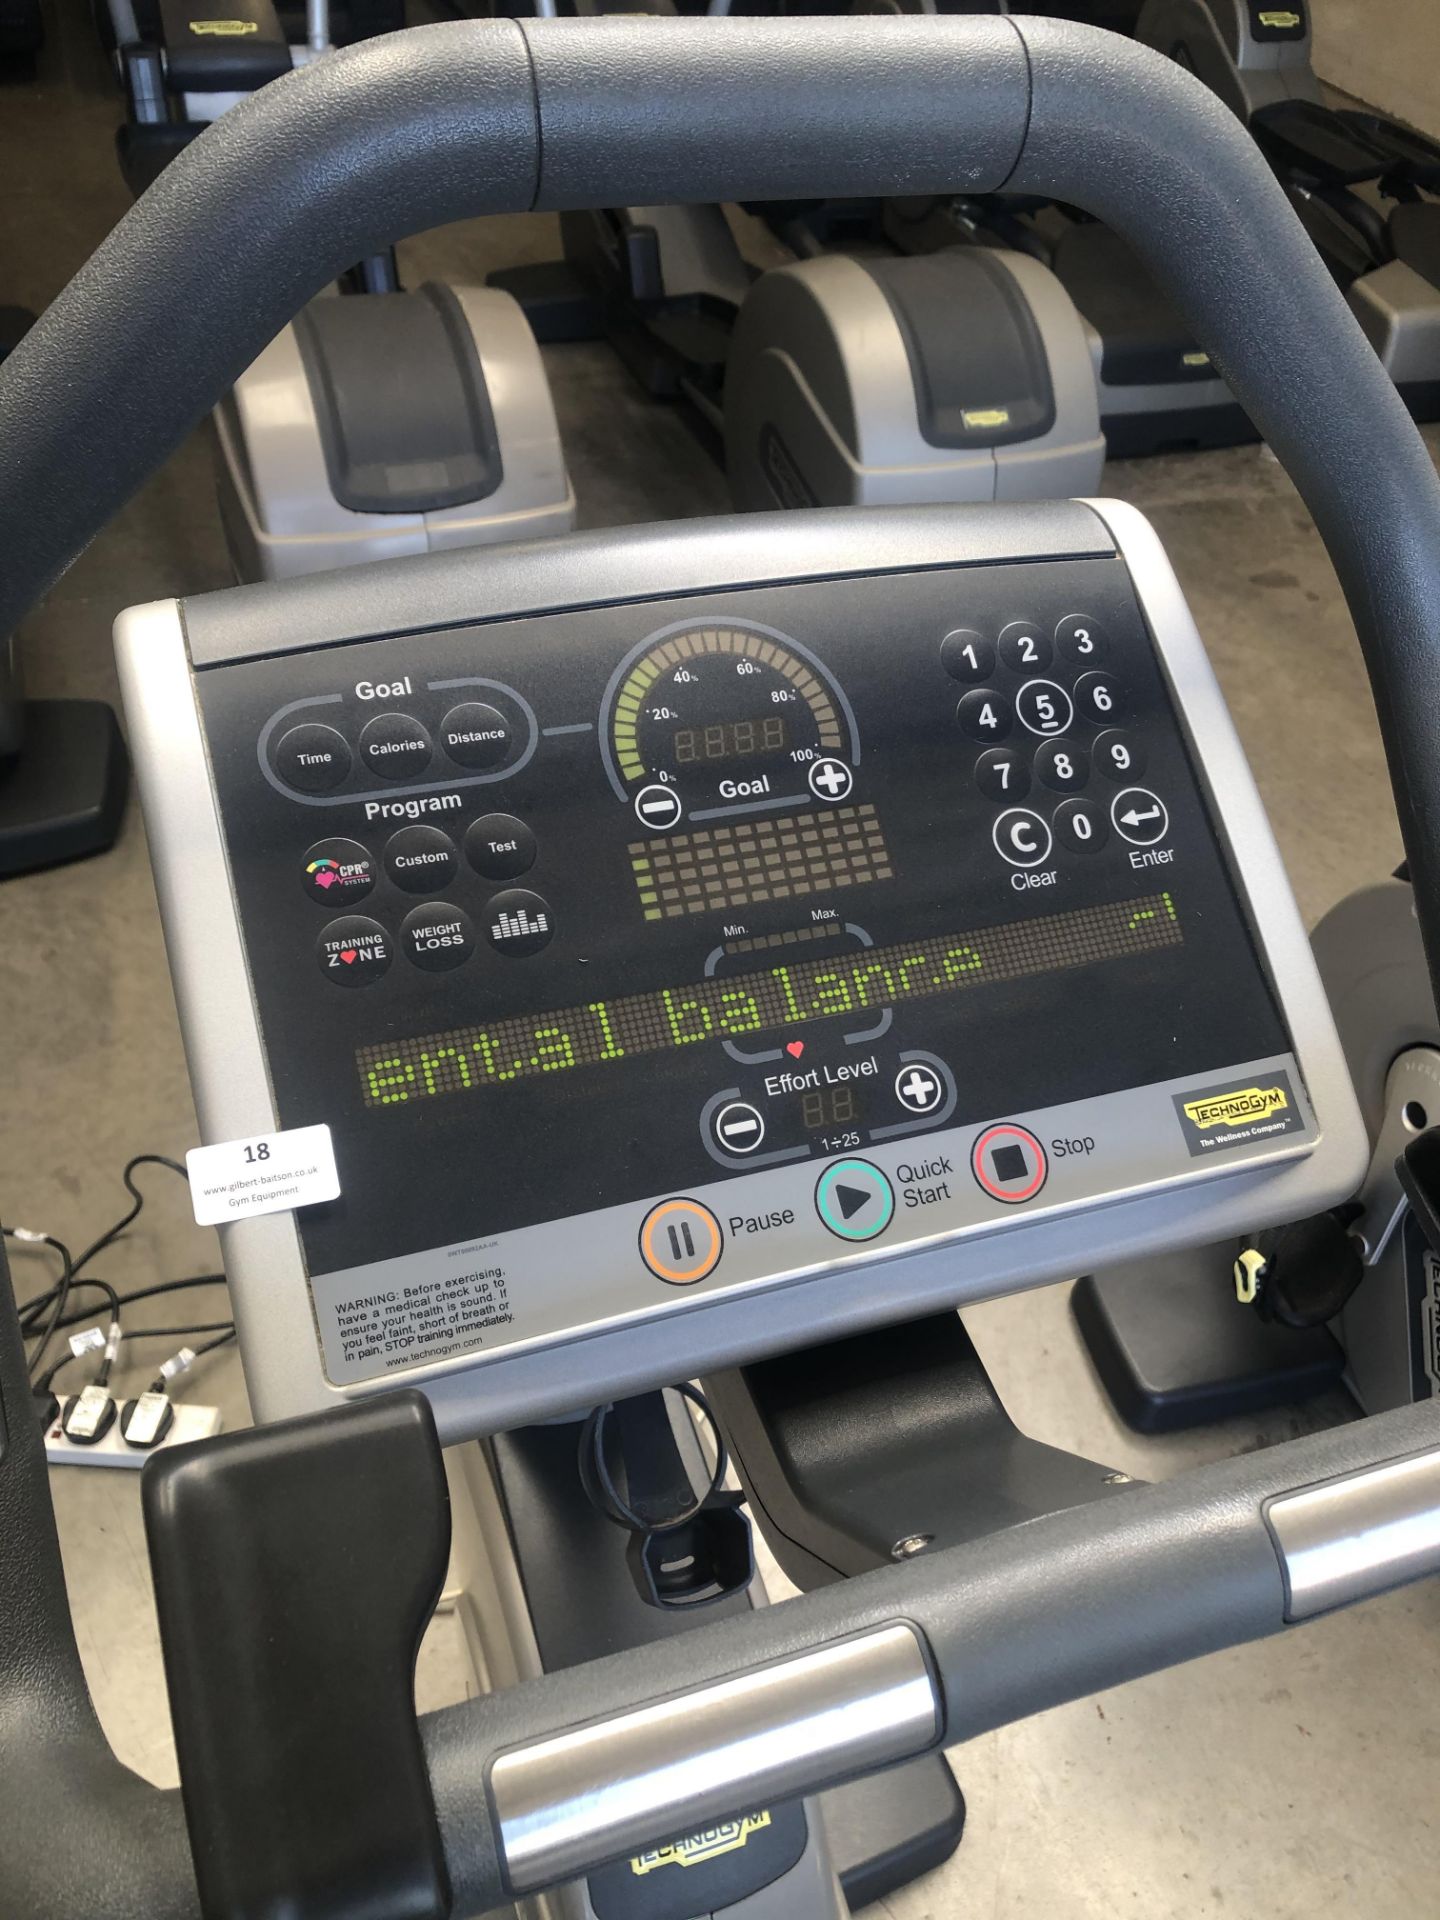 *Technogym 700 Series Upright Exercise Cycle with LED Panel - Image 2 of 2